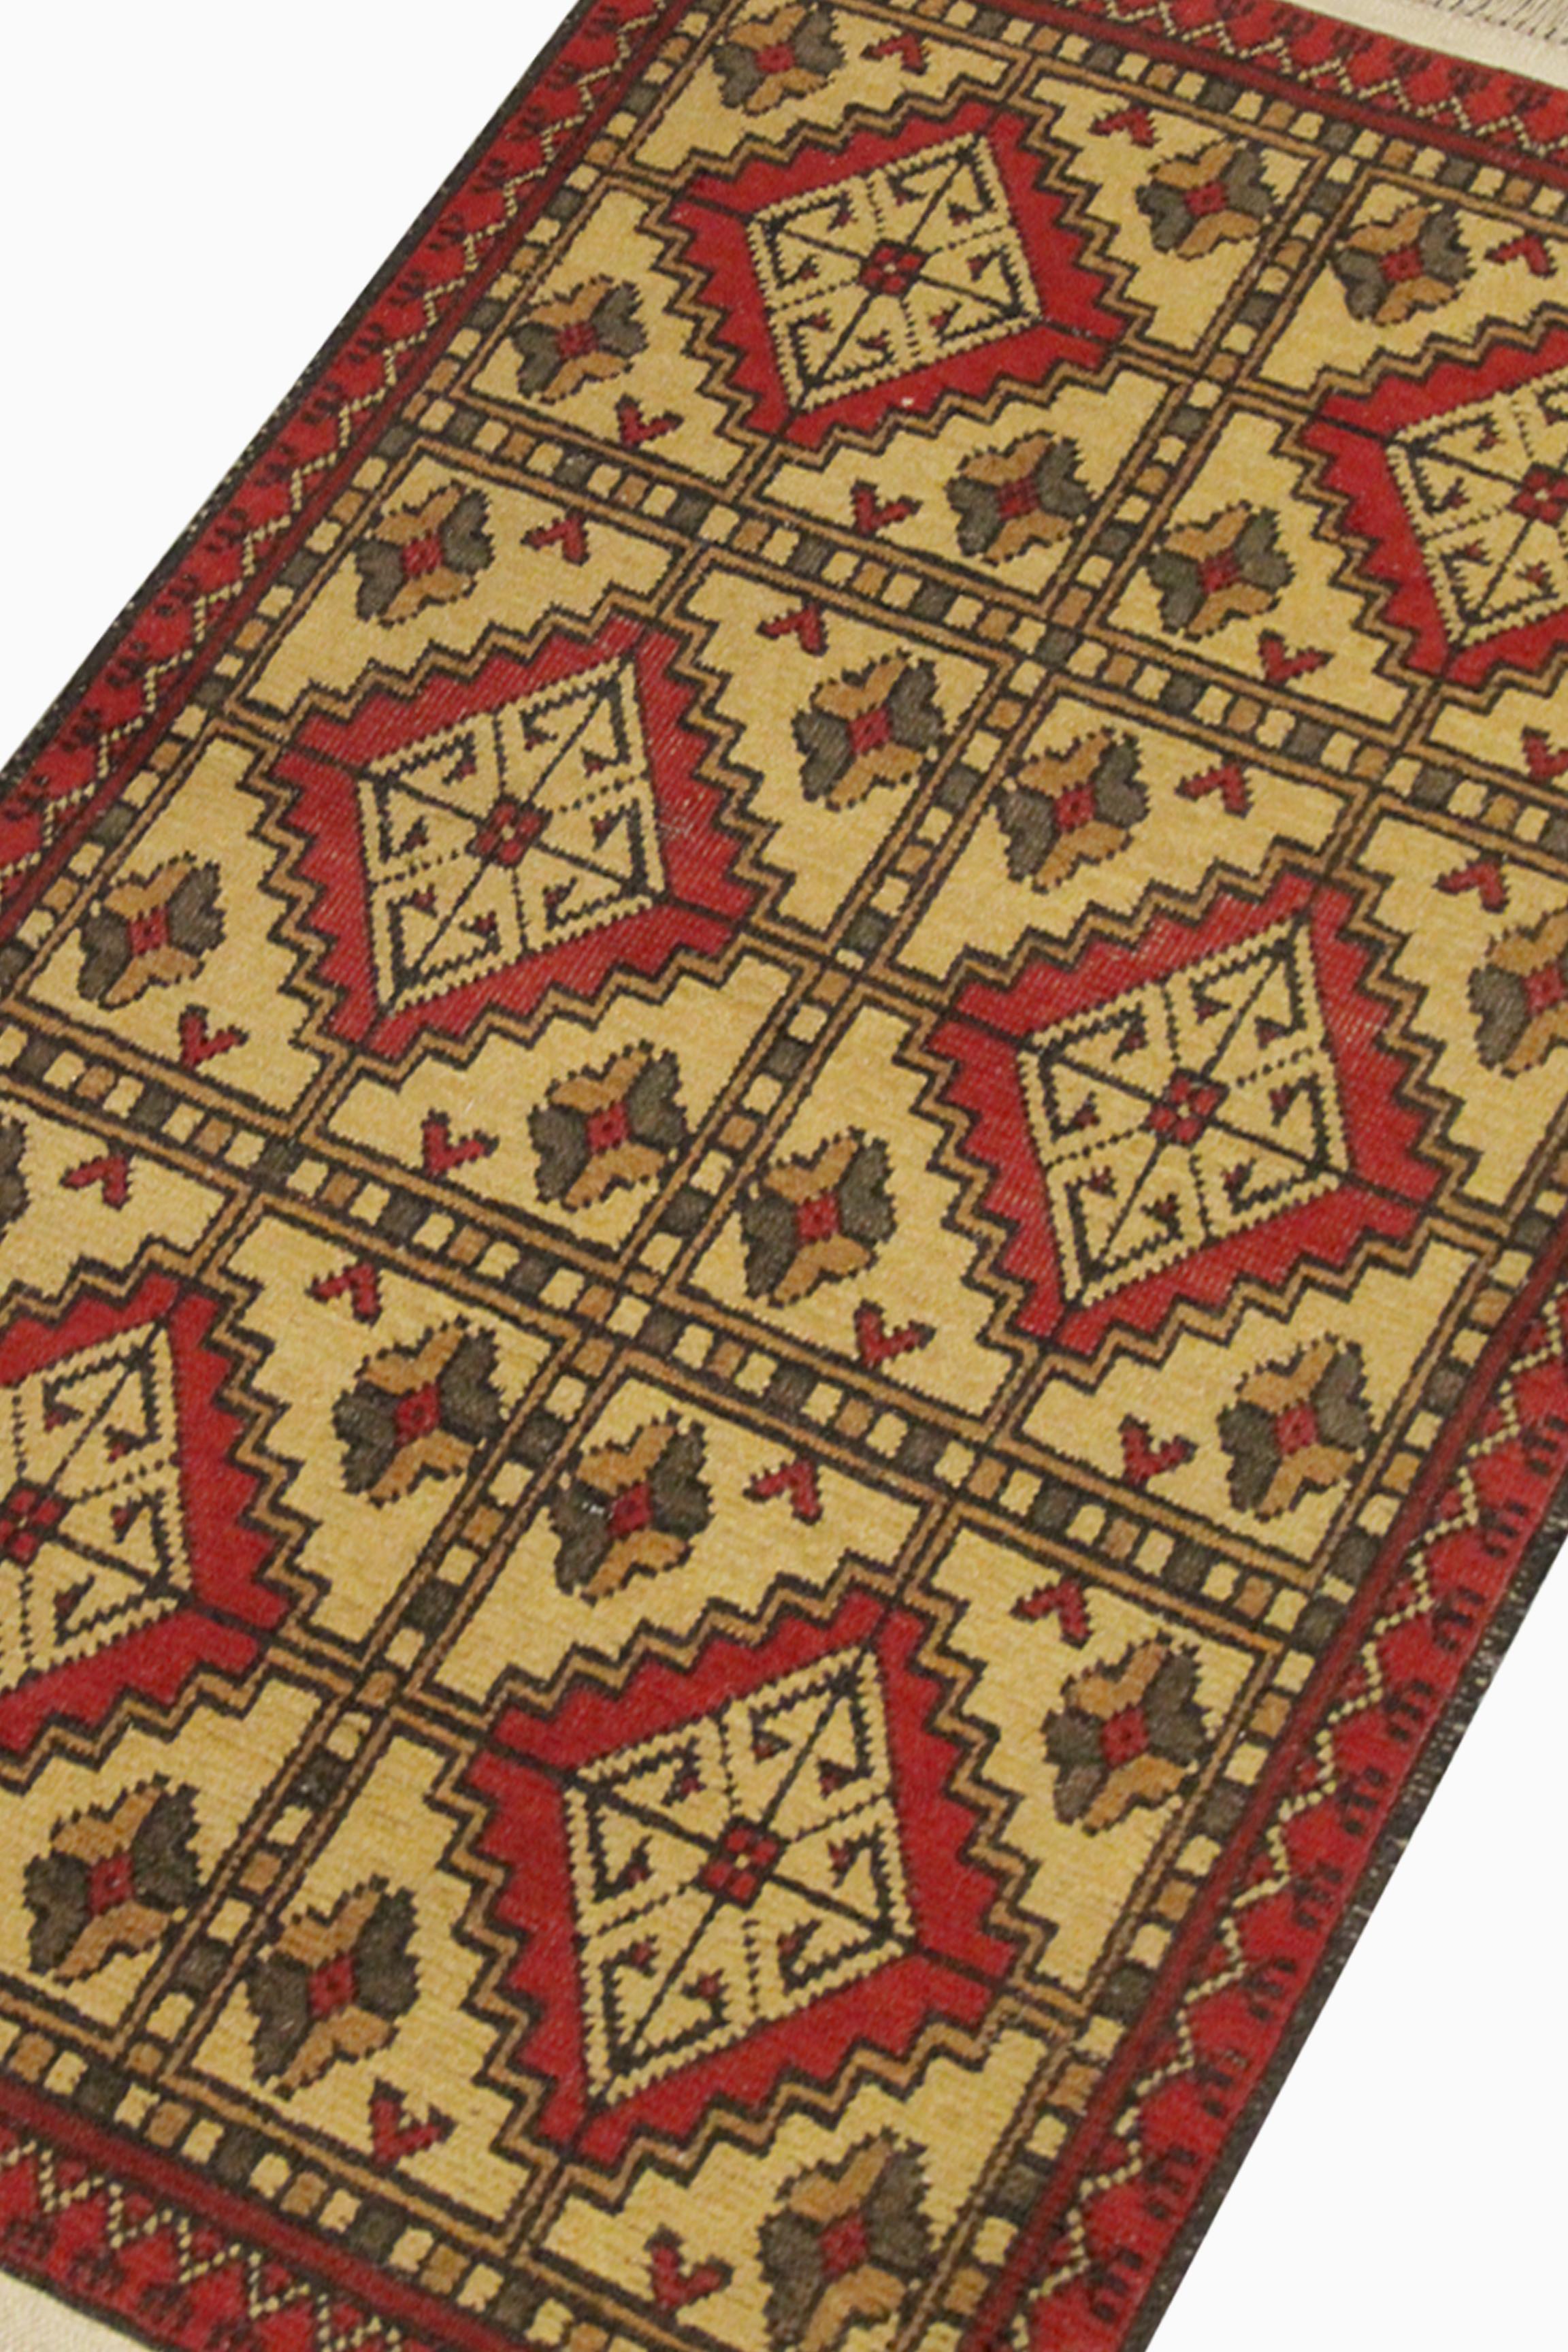 Tribal Geometric Area Rug Handwoven Oriental Living Room Carpet Red Gold  For Sale